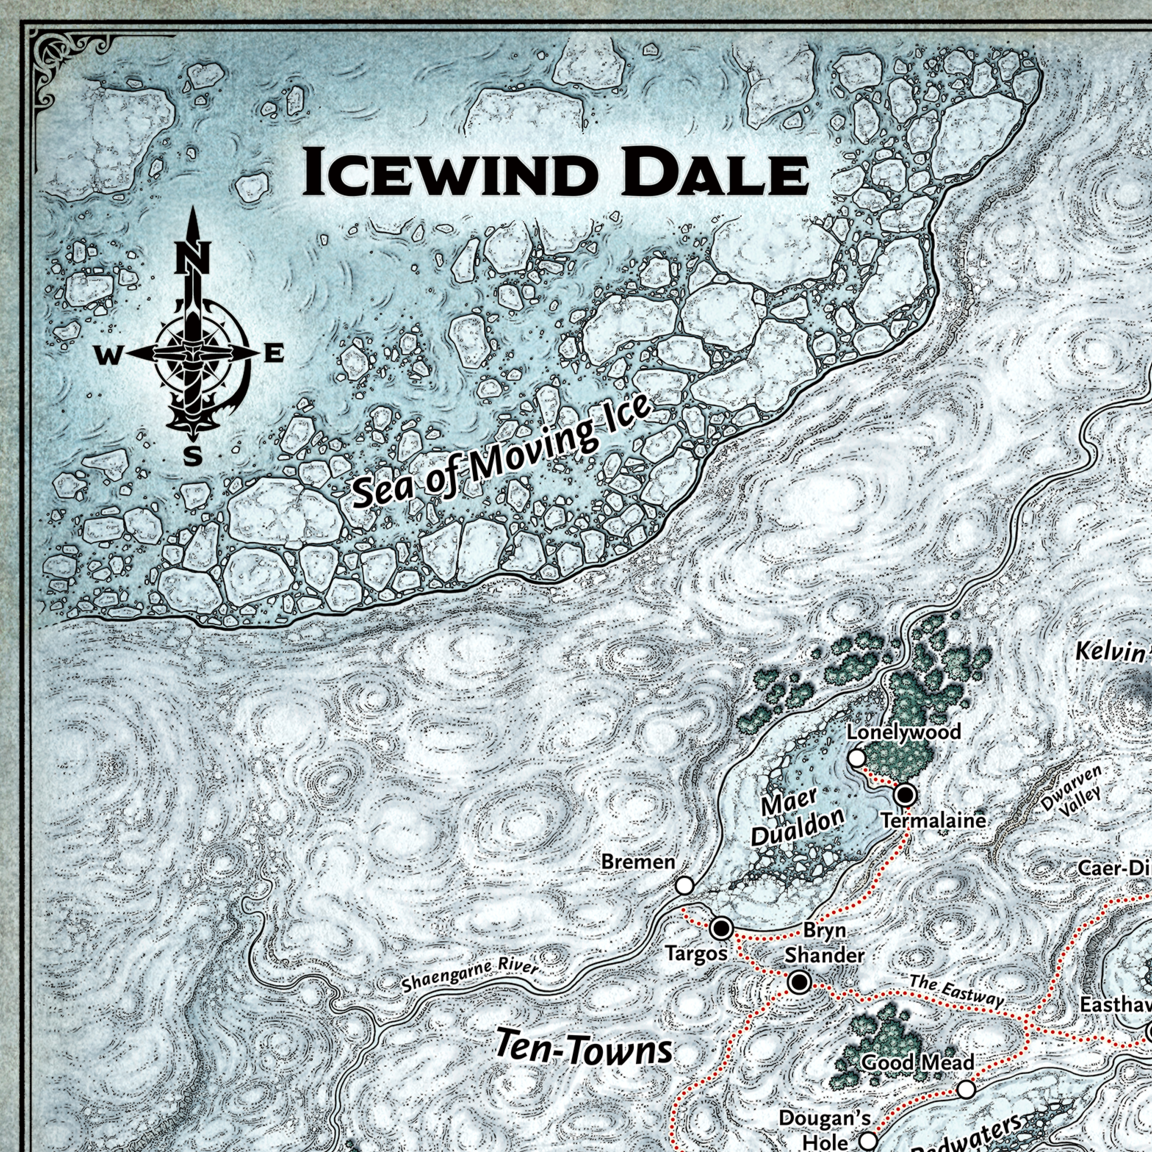 Platinum Edition of Icewind Dale: Rime of the Frostmaiden (D&D)